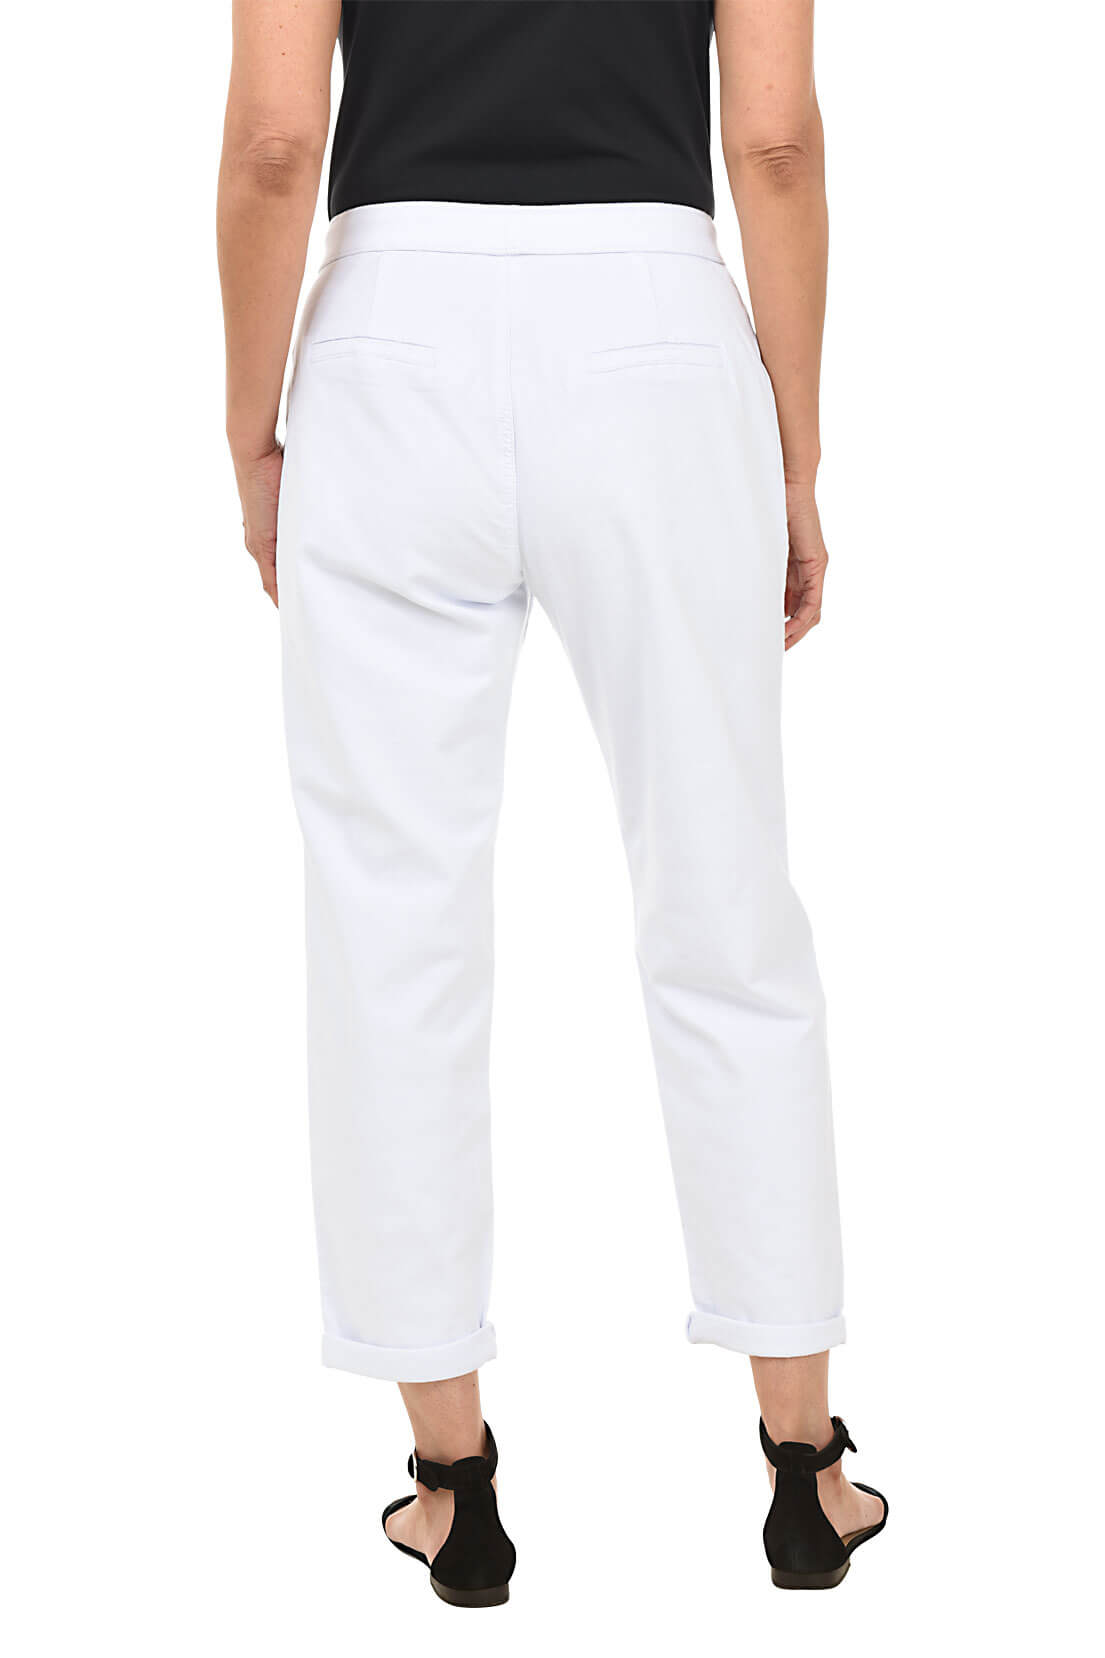 ETHYL CLOTHING French Terry Casual Drawstring Ankle Pant